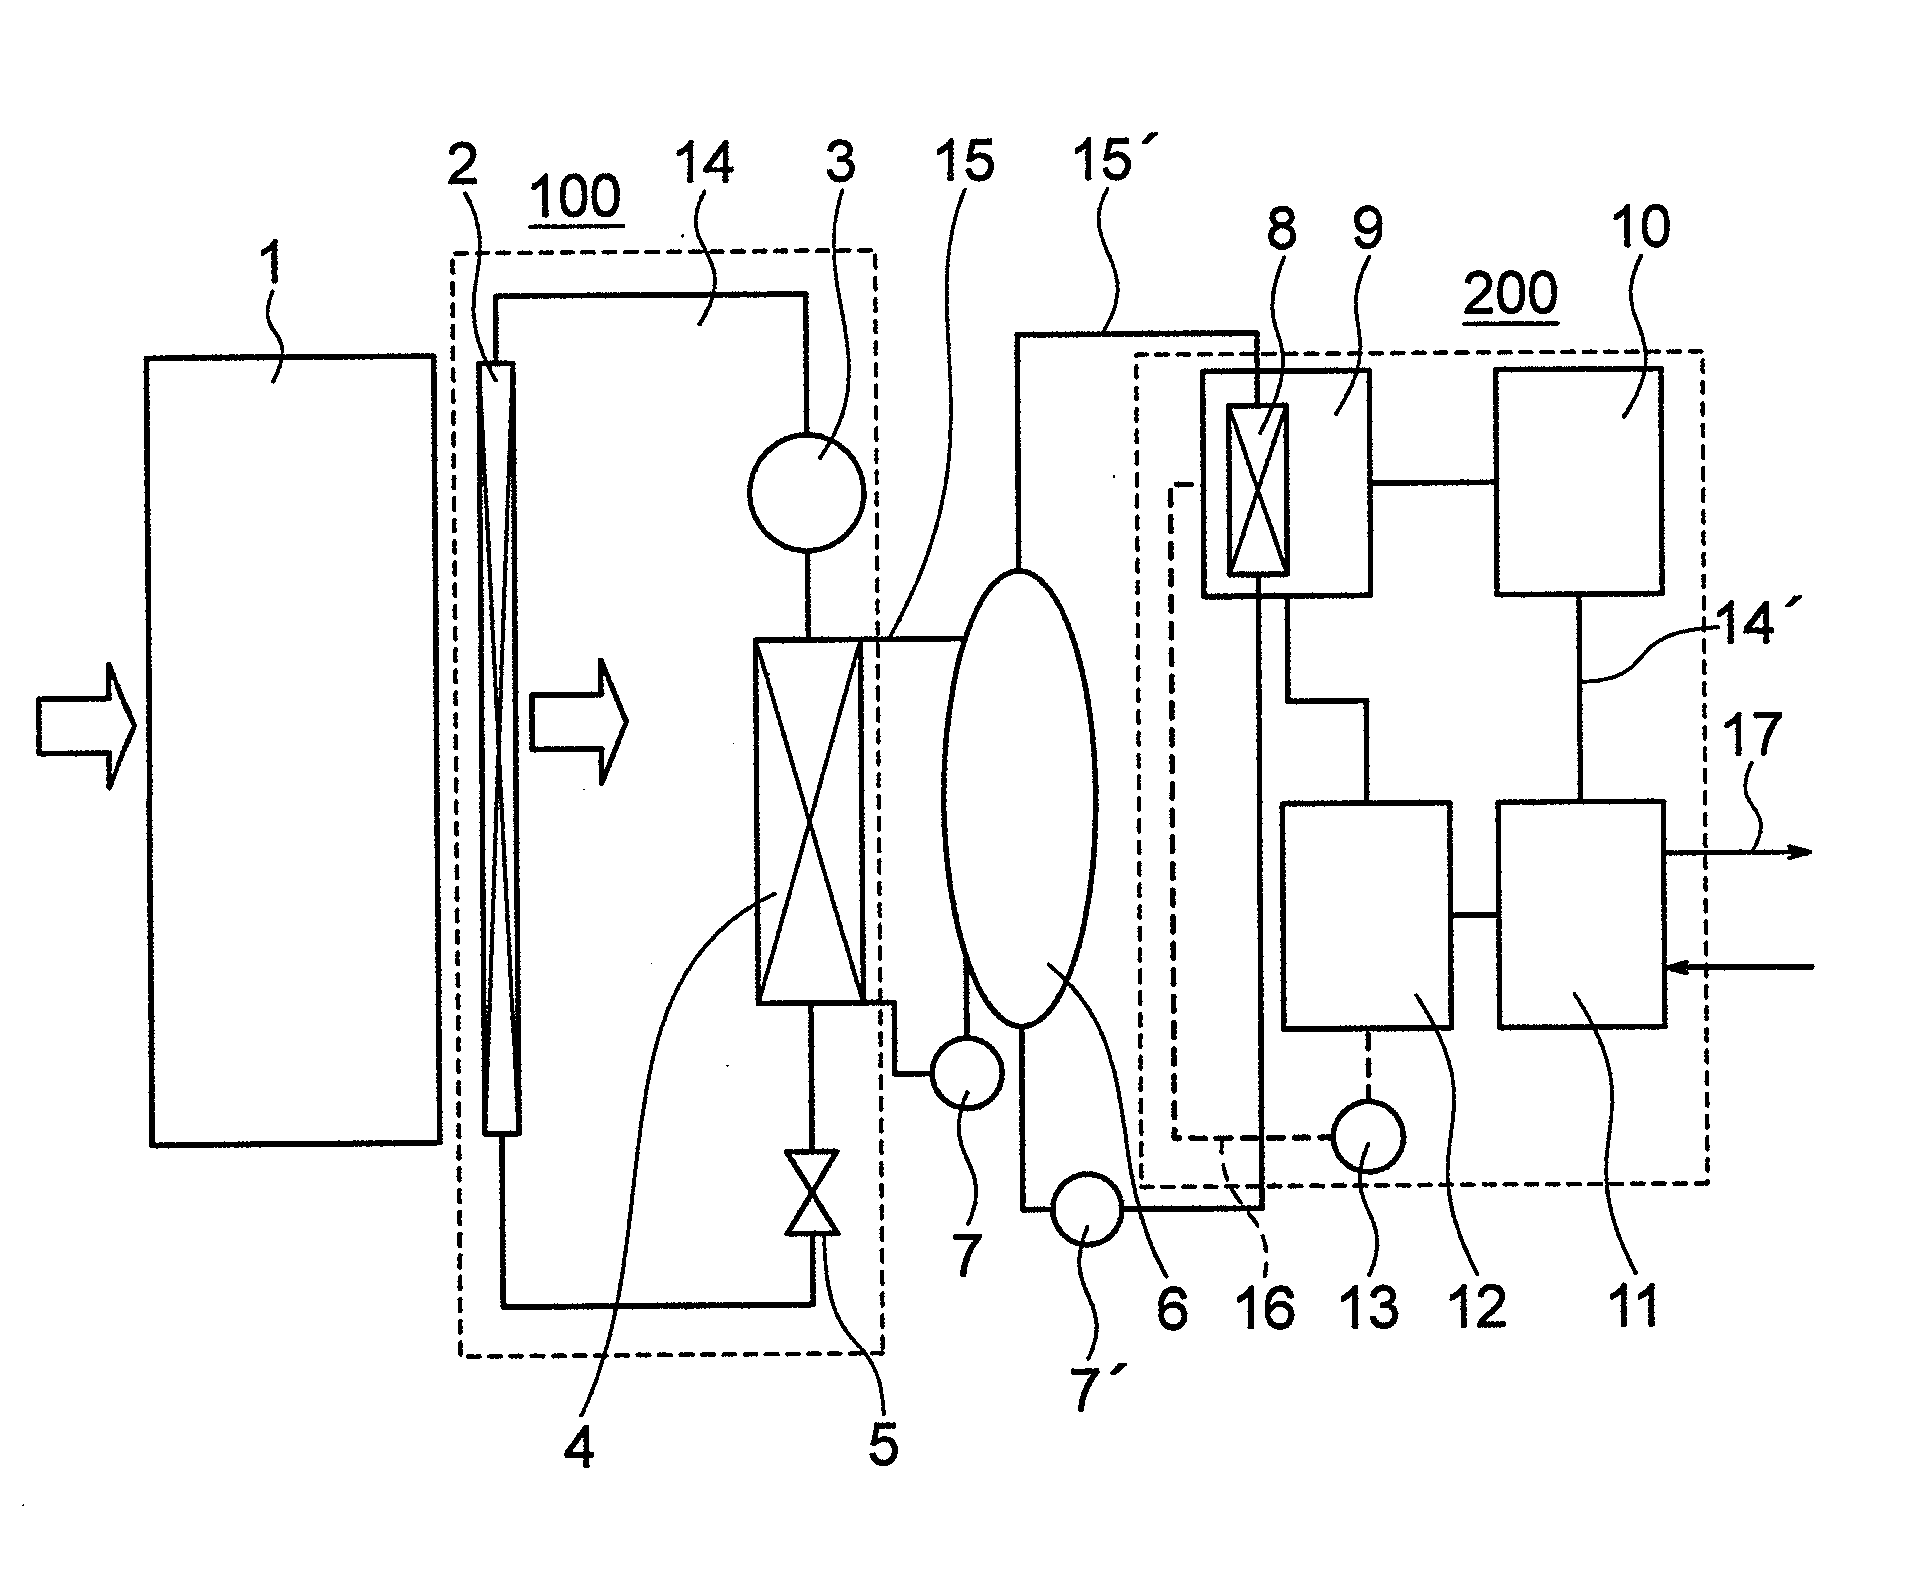 Electronic equipment system